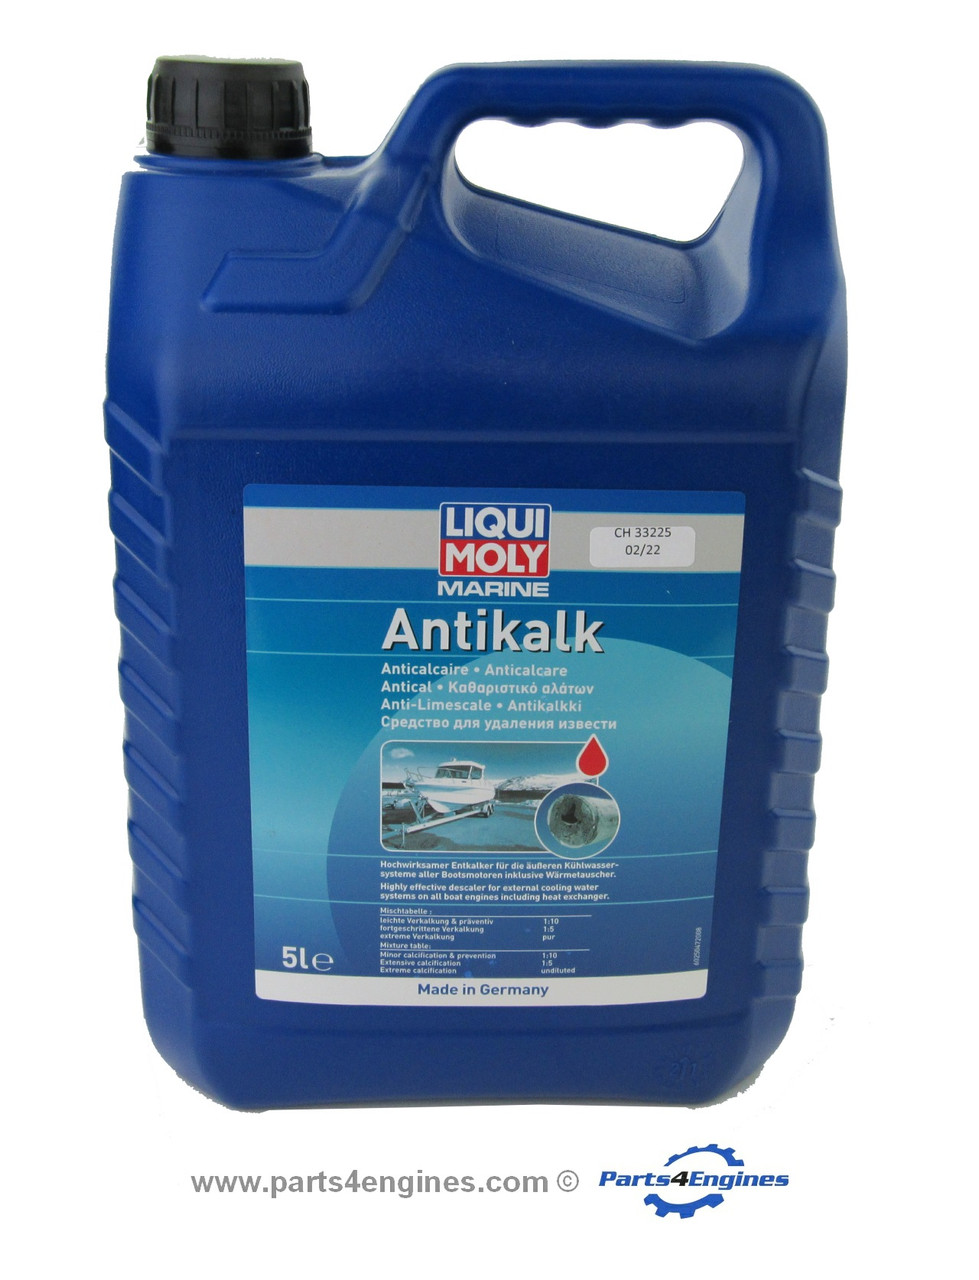 Liqui Moly Marine Anti-Limescale, from parts4engines.com